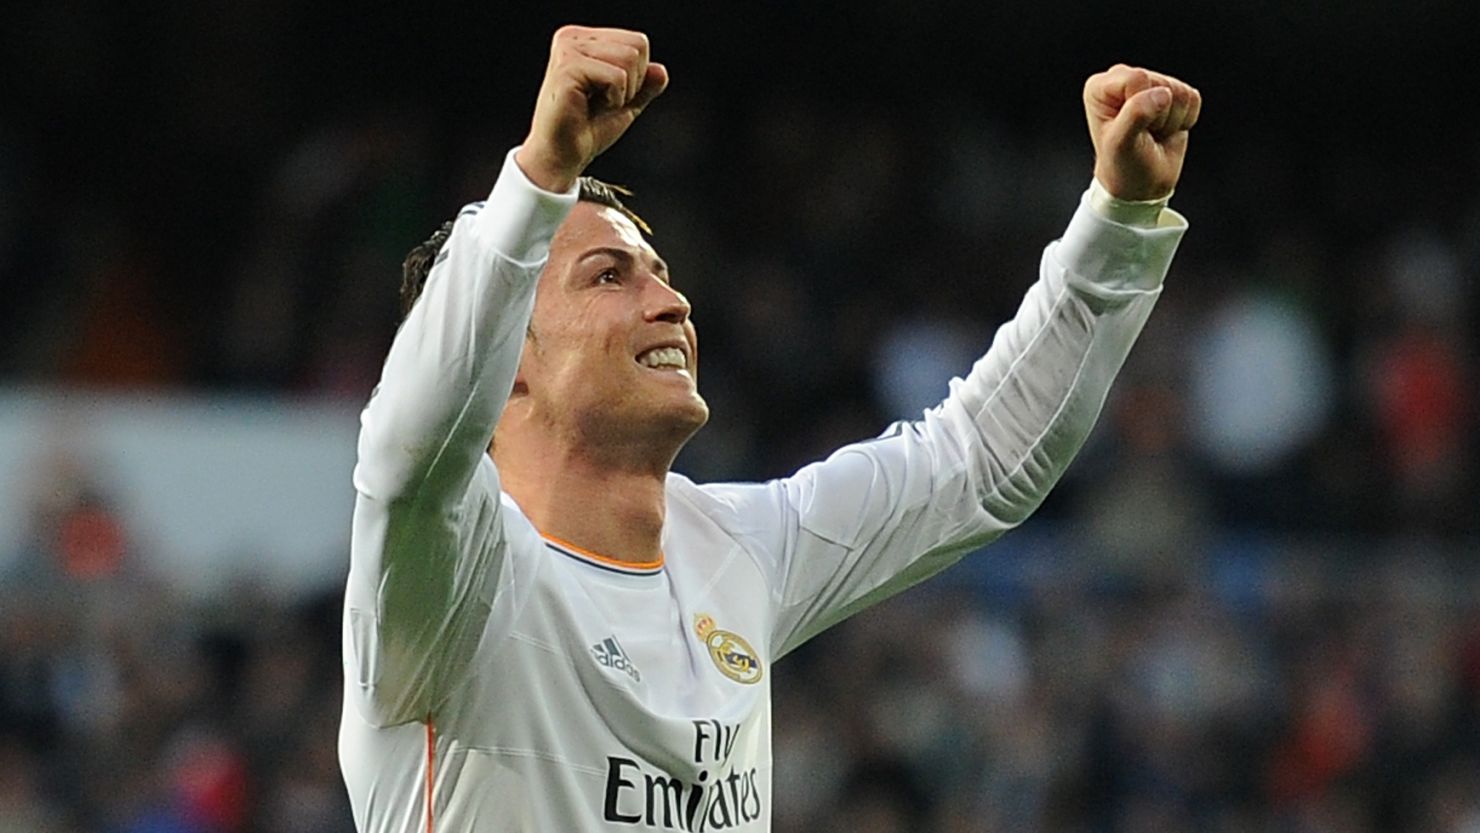 Cristiano Ronaldo raises his arms in triumph after scoring the opener for Real Madrid against Levante.